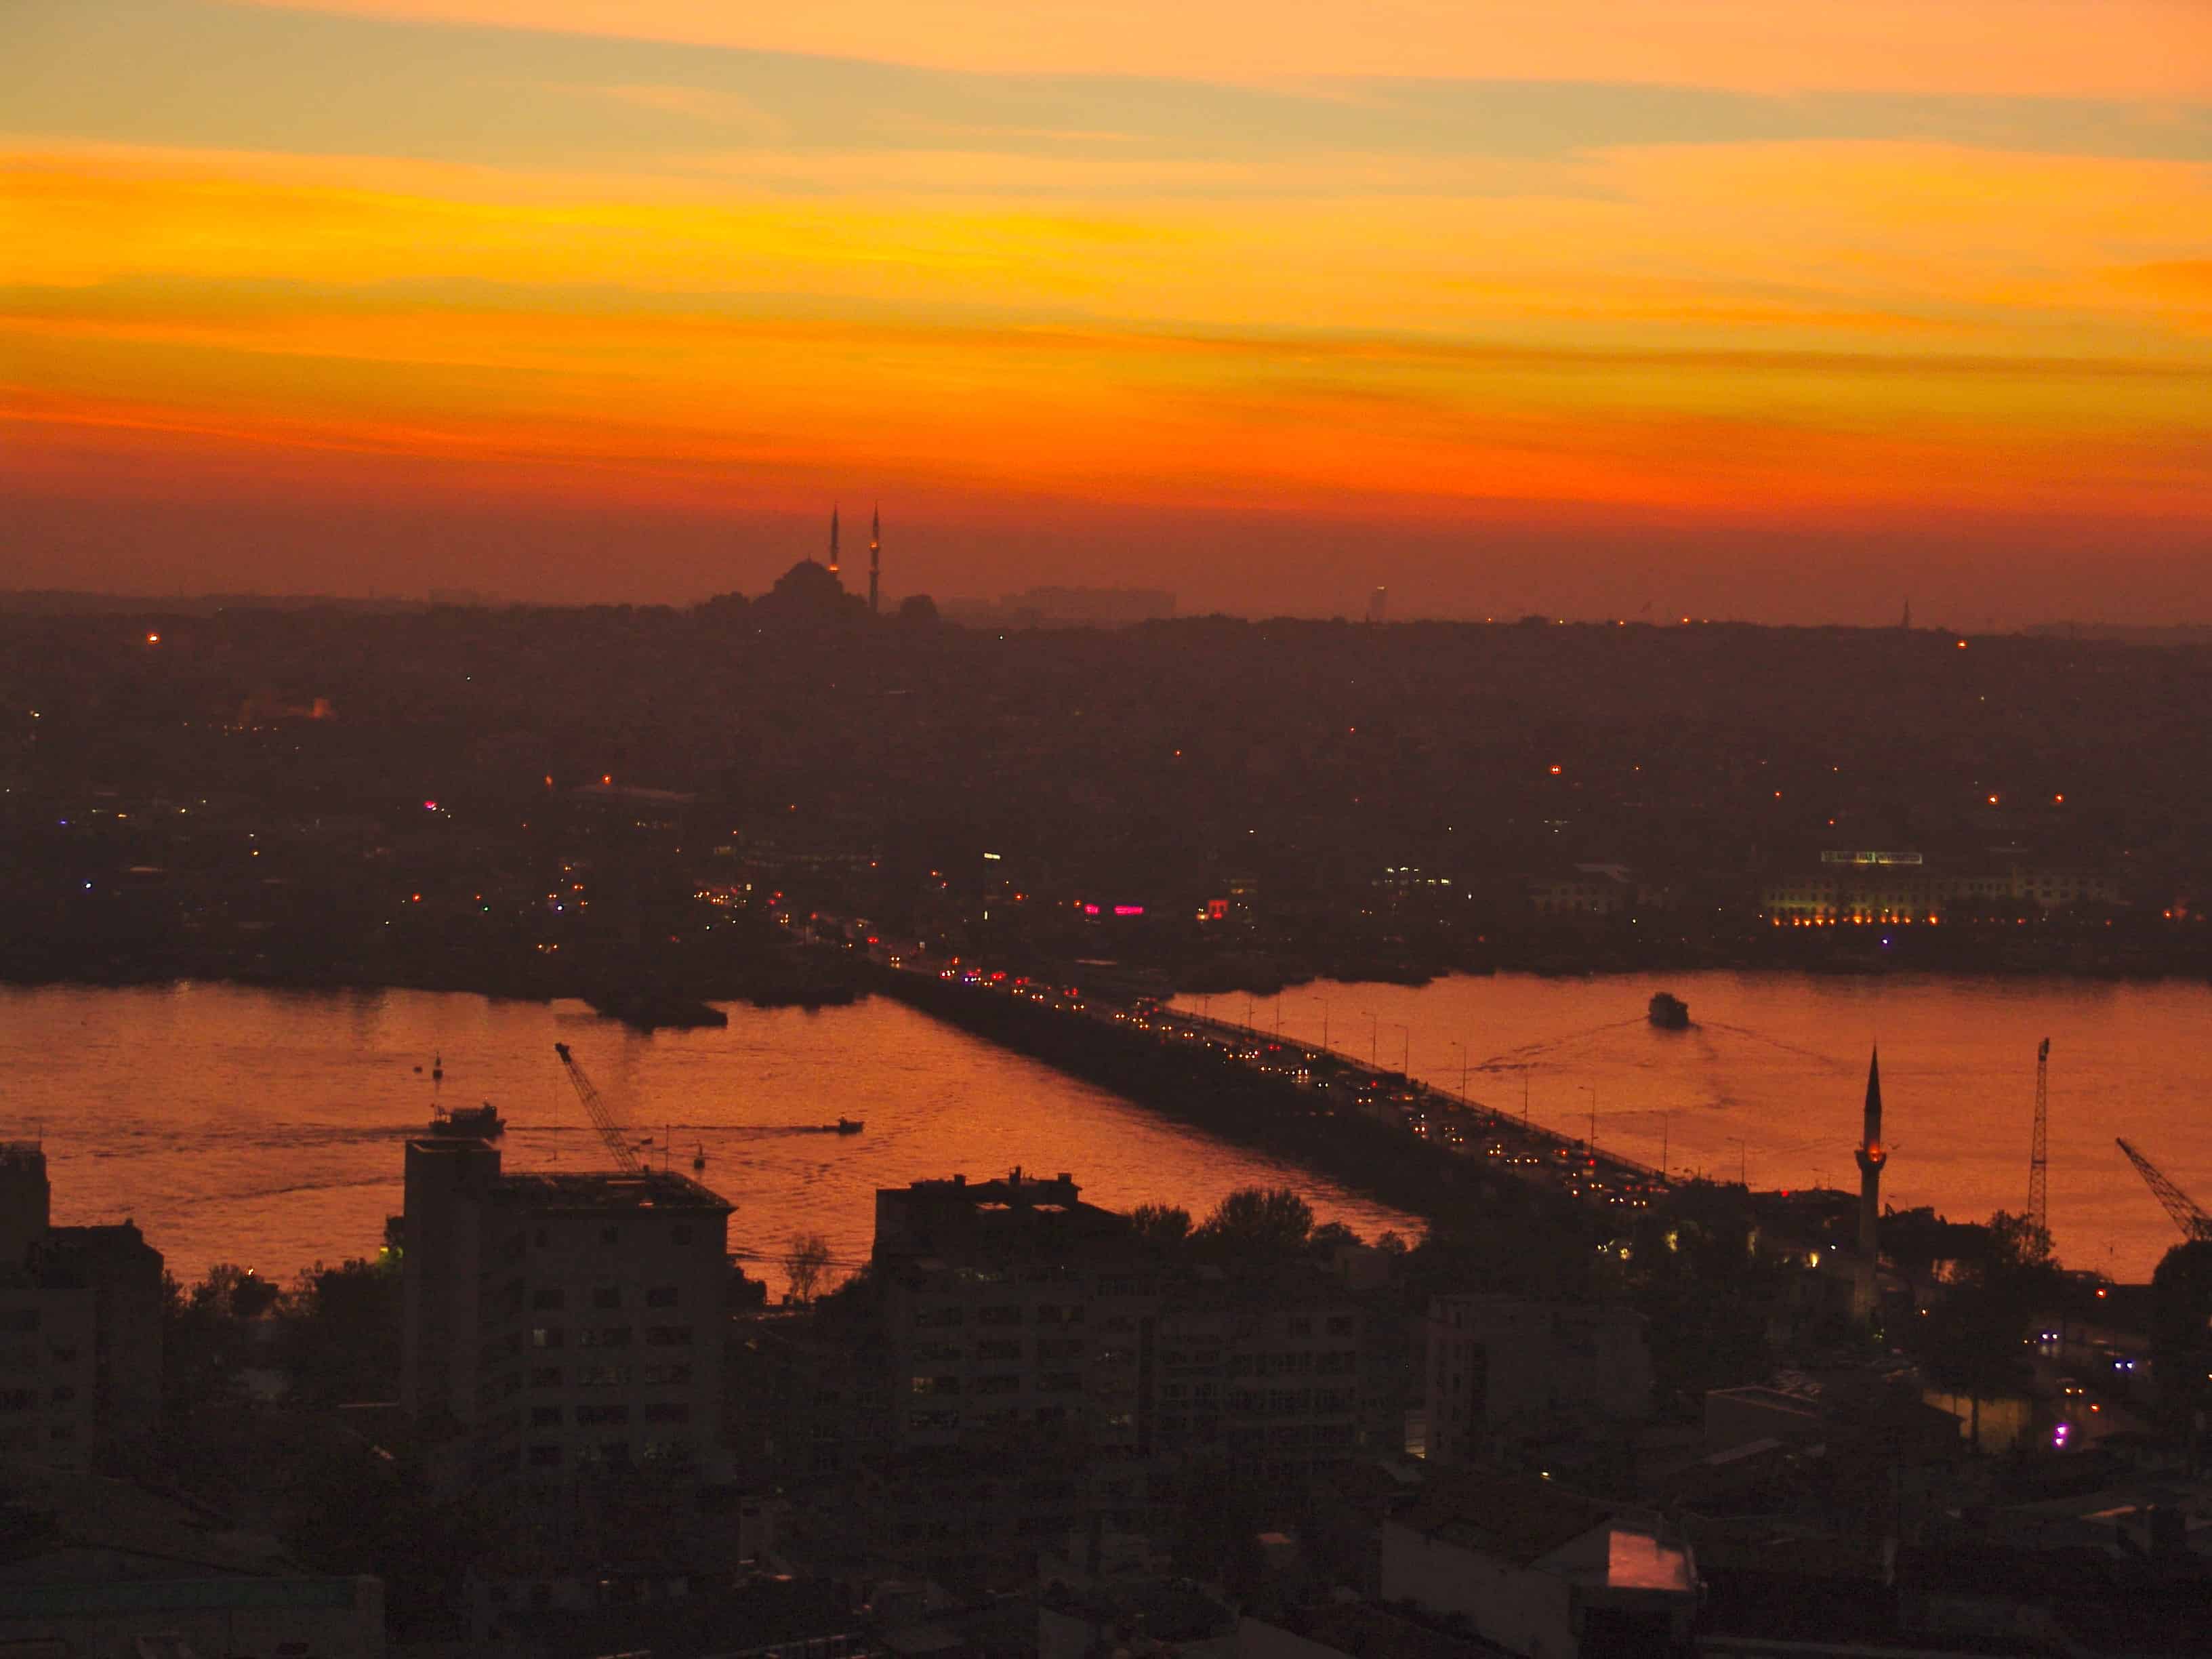 Looking across the Golden Horn at sunset from the top of the Galata Tower in Beyoğlu, Istanbul, Turkey